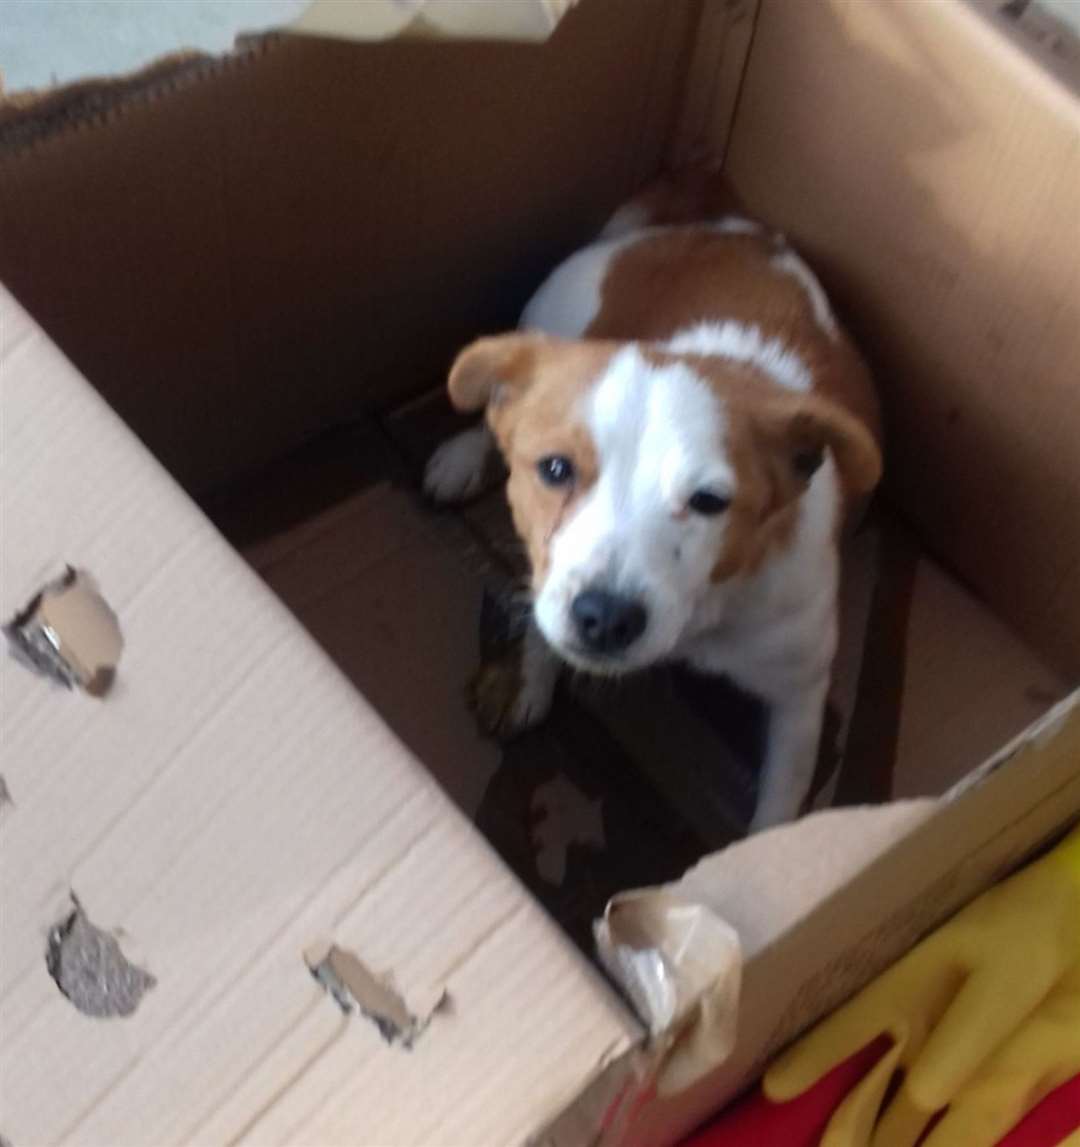 The pregnant Jack Russell Terrier was found in a terrible condition just hours from giving birth. Picture: RSPCA